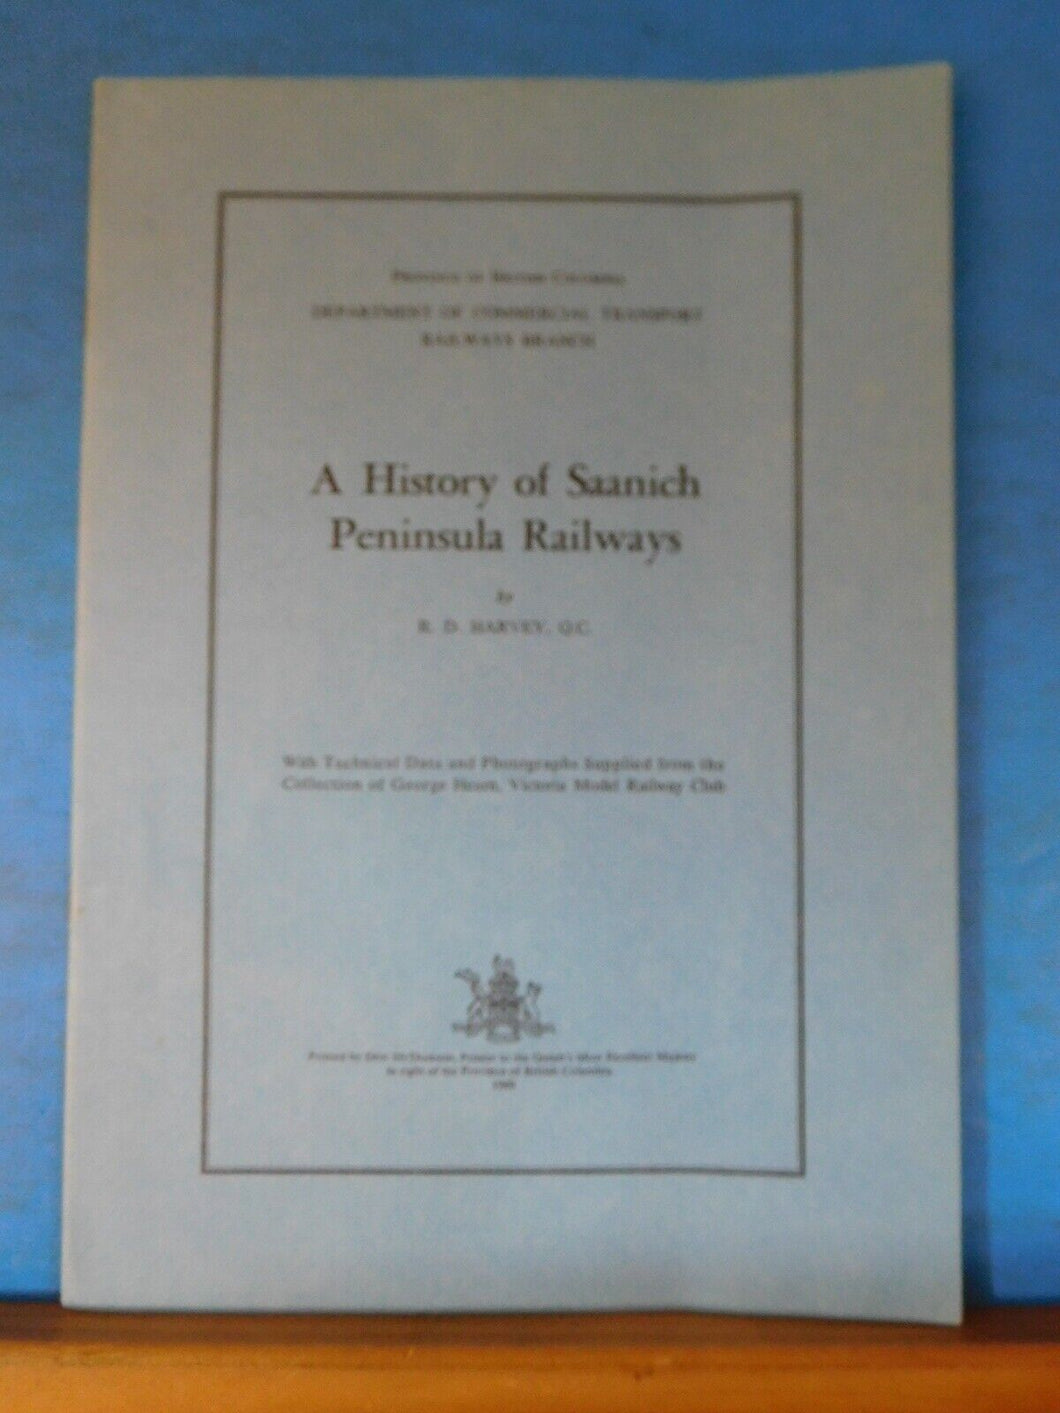 History of Saanich Peninsula Railways by RD Harvey Soft Cover 1960 Technical dat